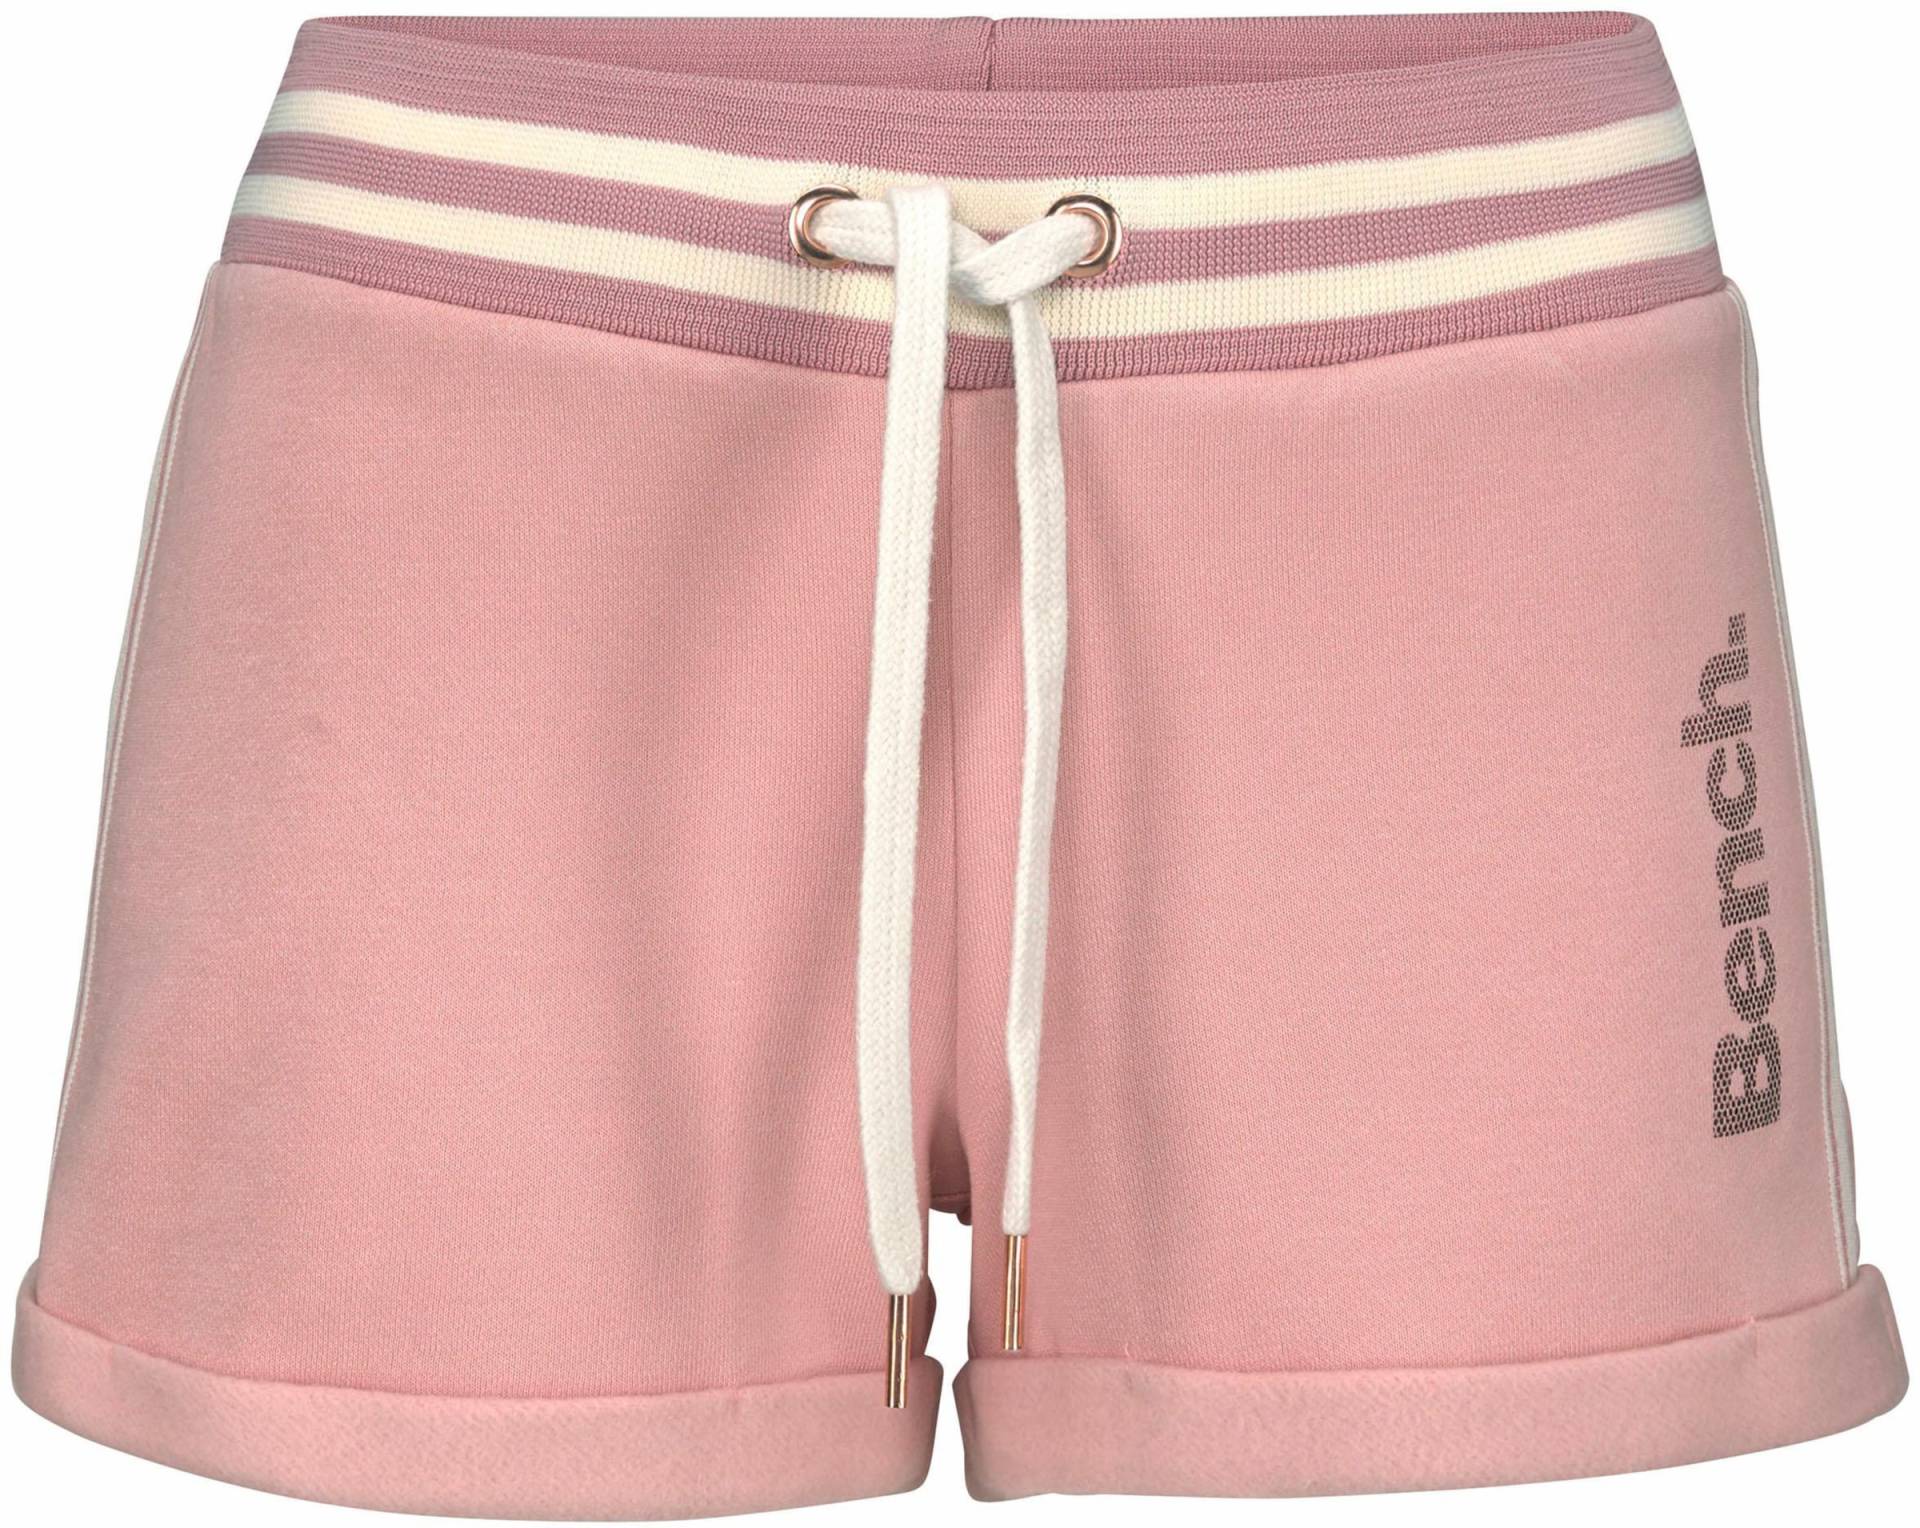 Relaxshorts in apricot von Bench.